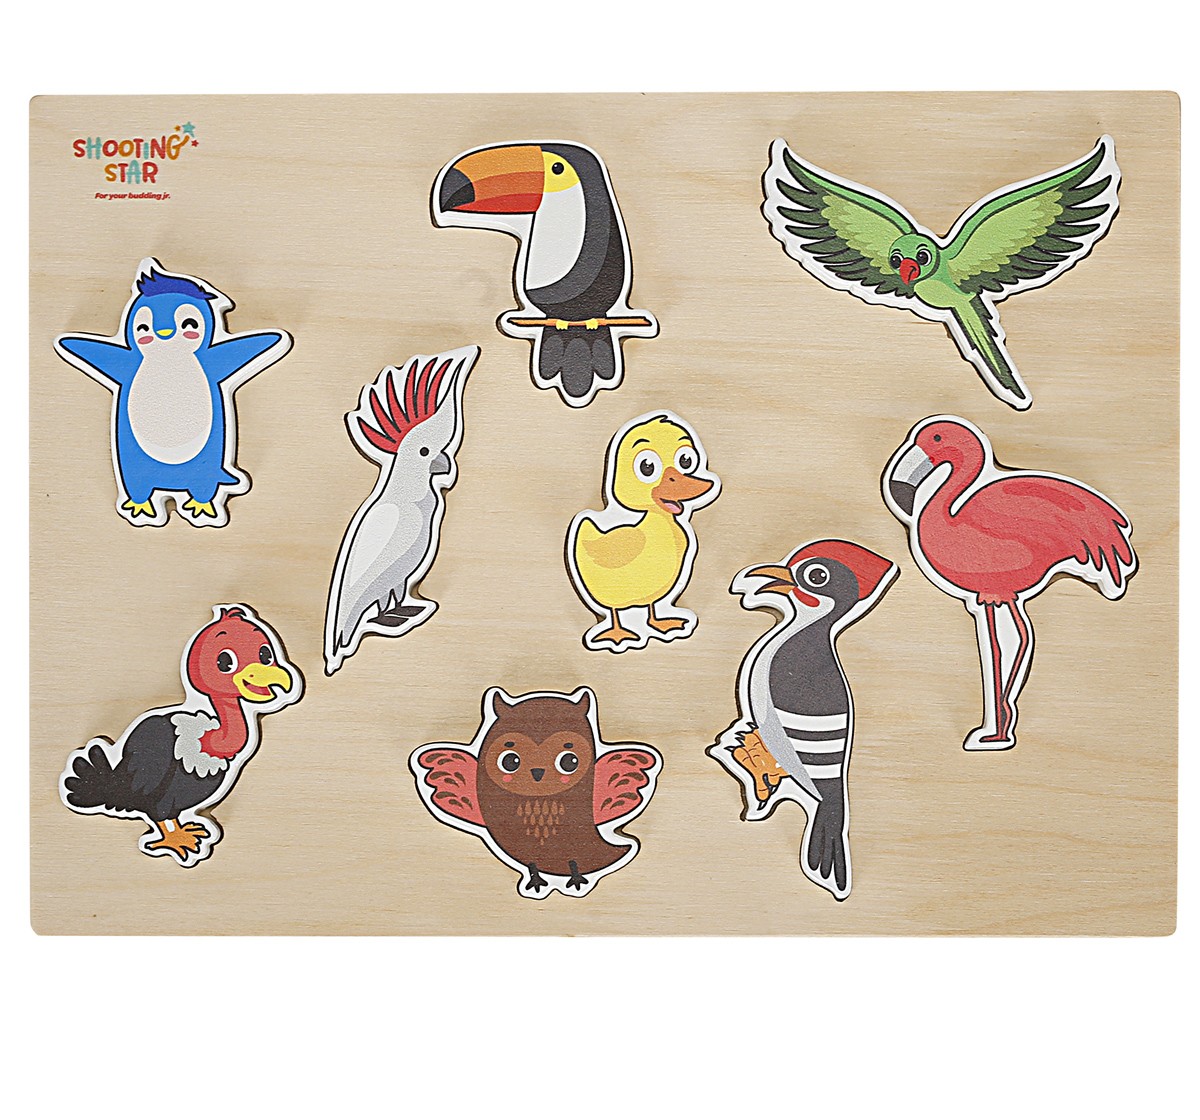 Shooting Star Birds Raised Chunky 9 Piece Puzzle for kids 3Y+, Multicolour